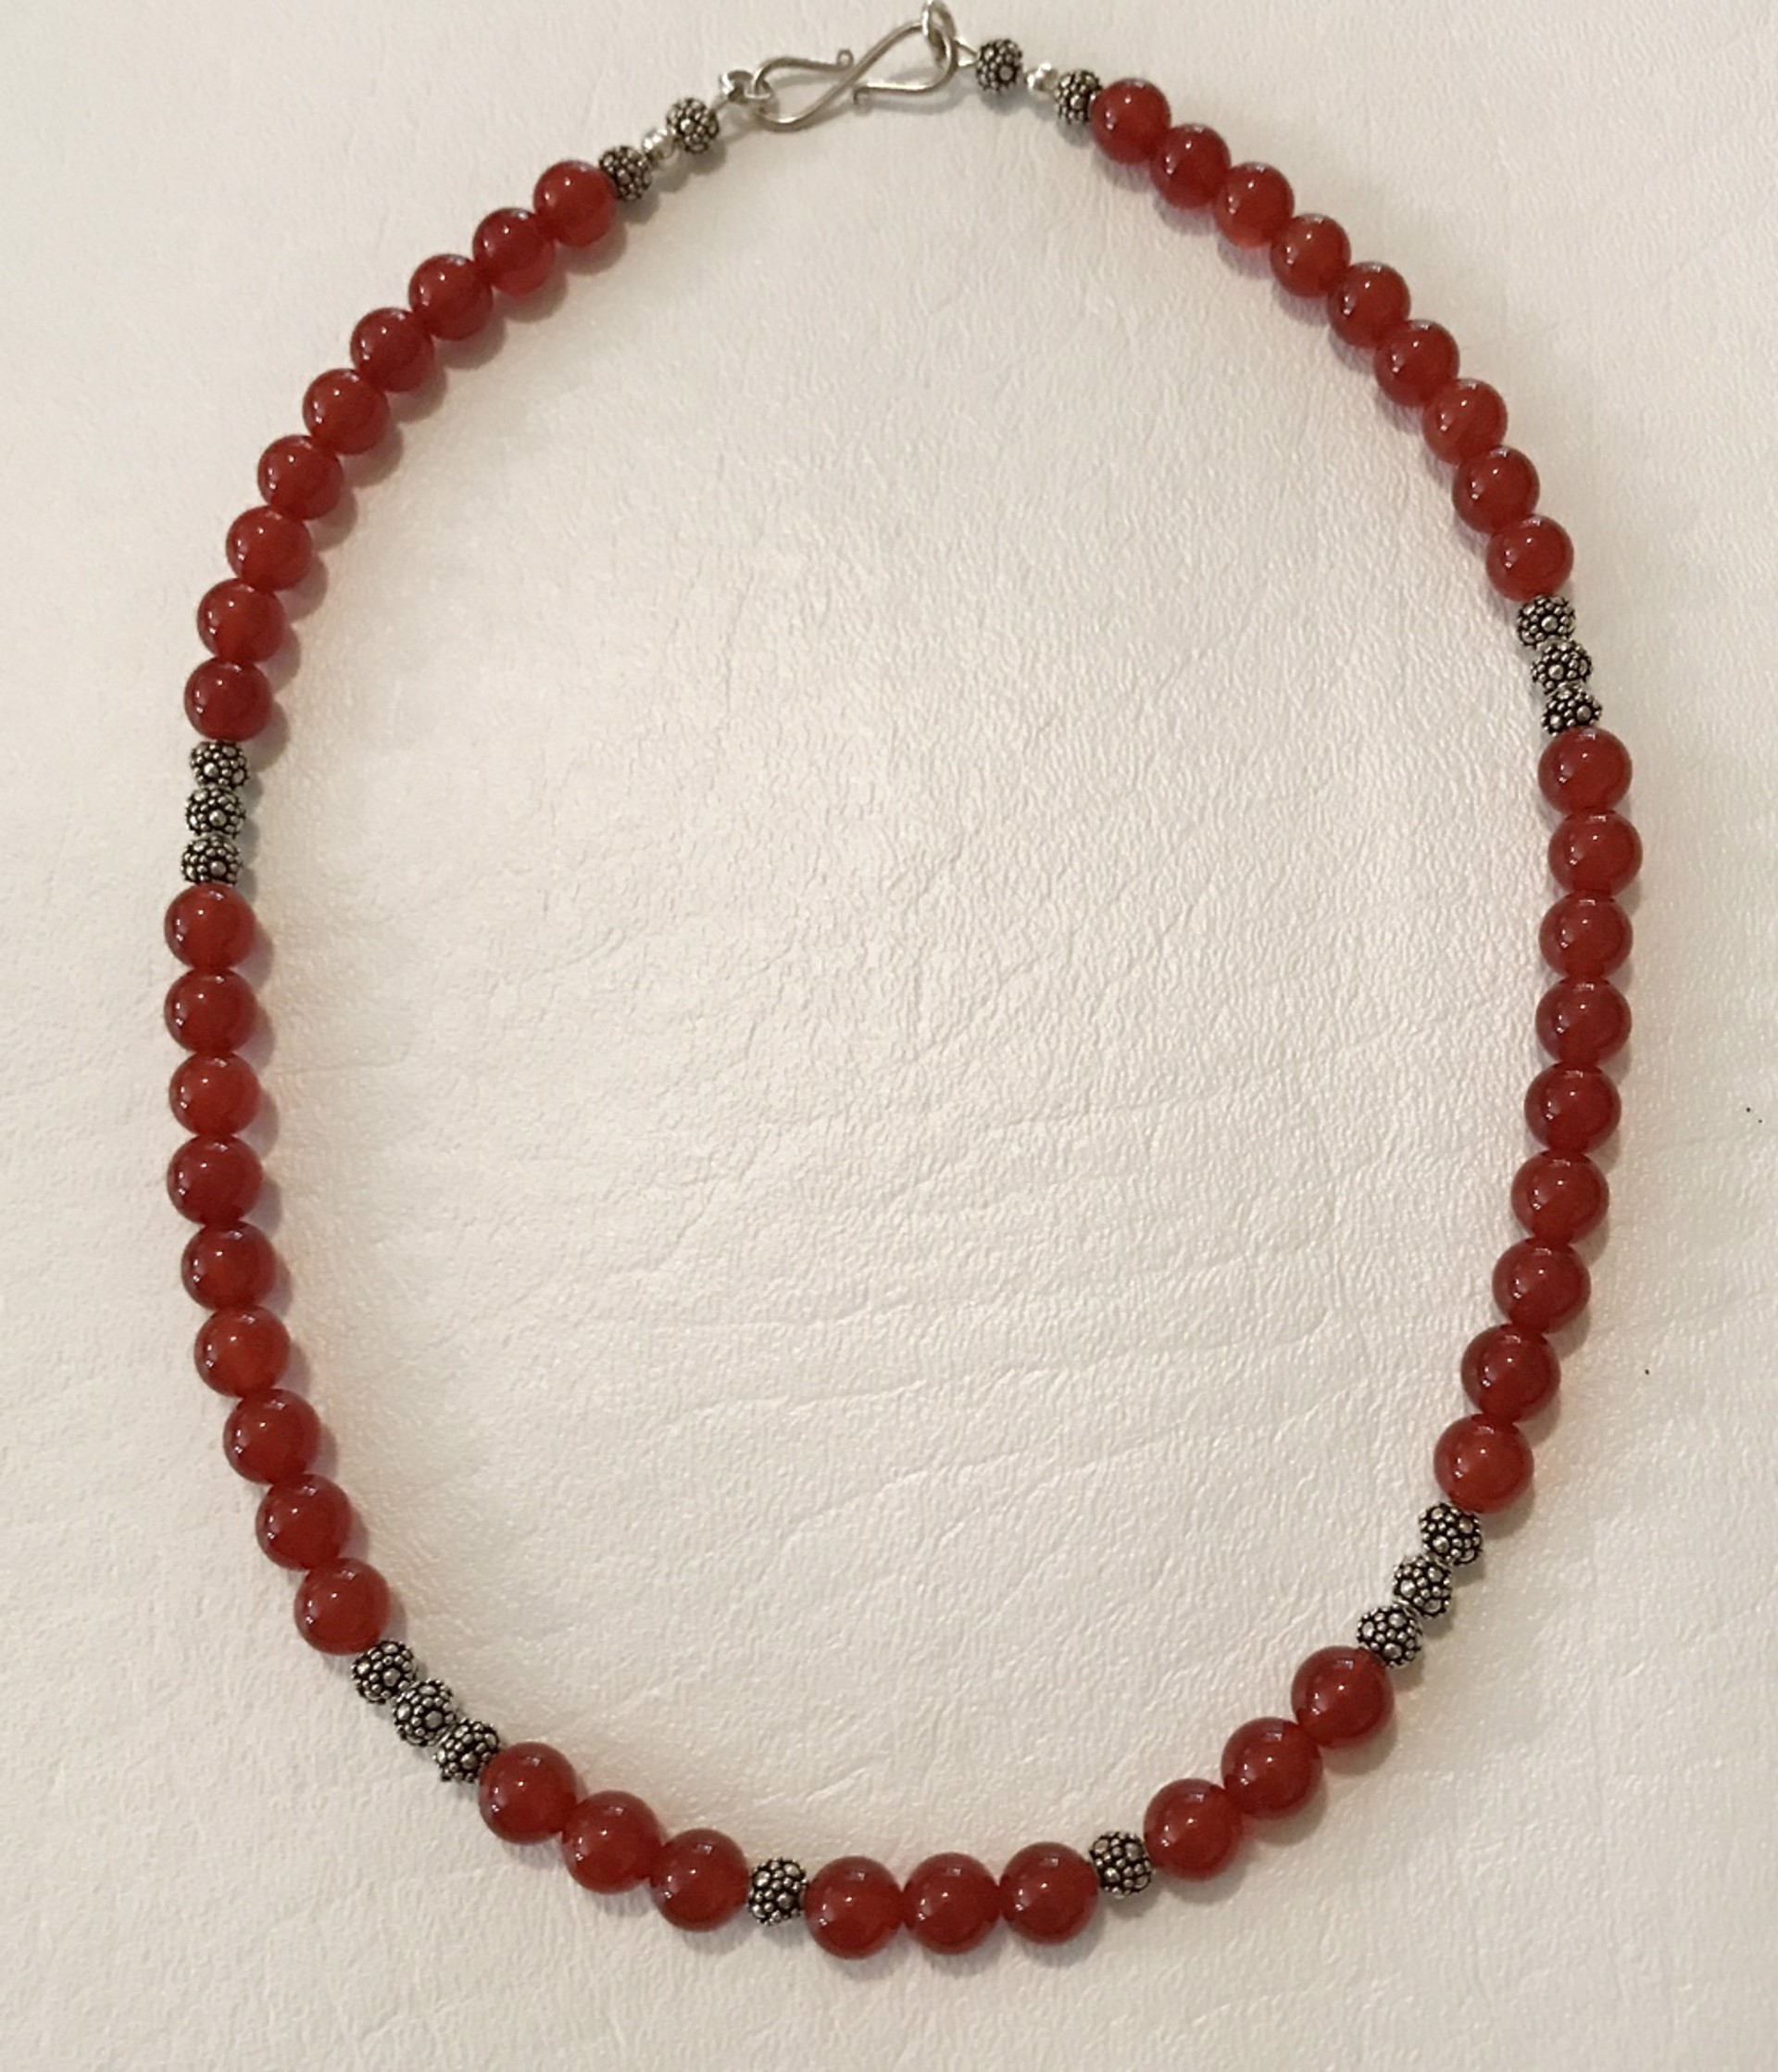 Necklace - Carnelian & Sterling Silver  # 7772 by Bonnie Jaus